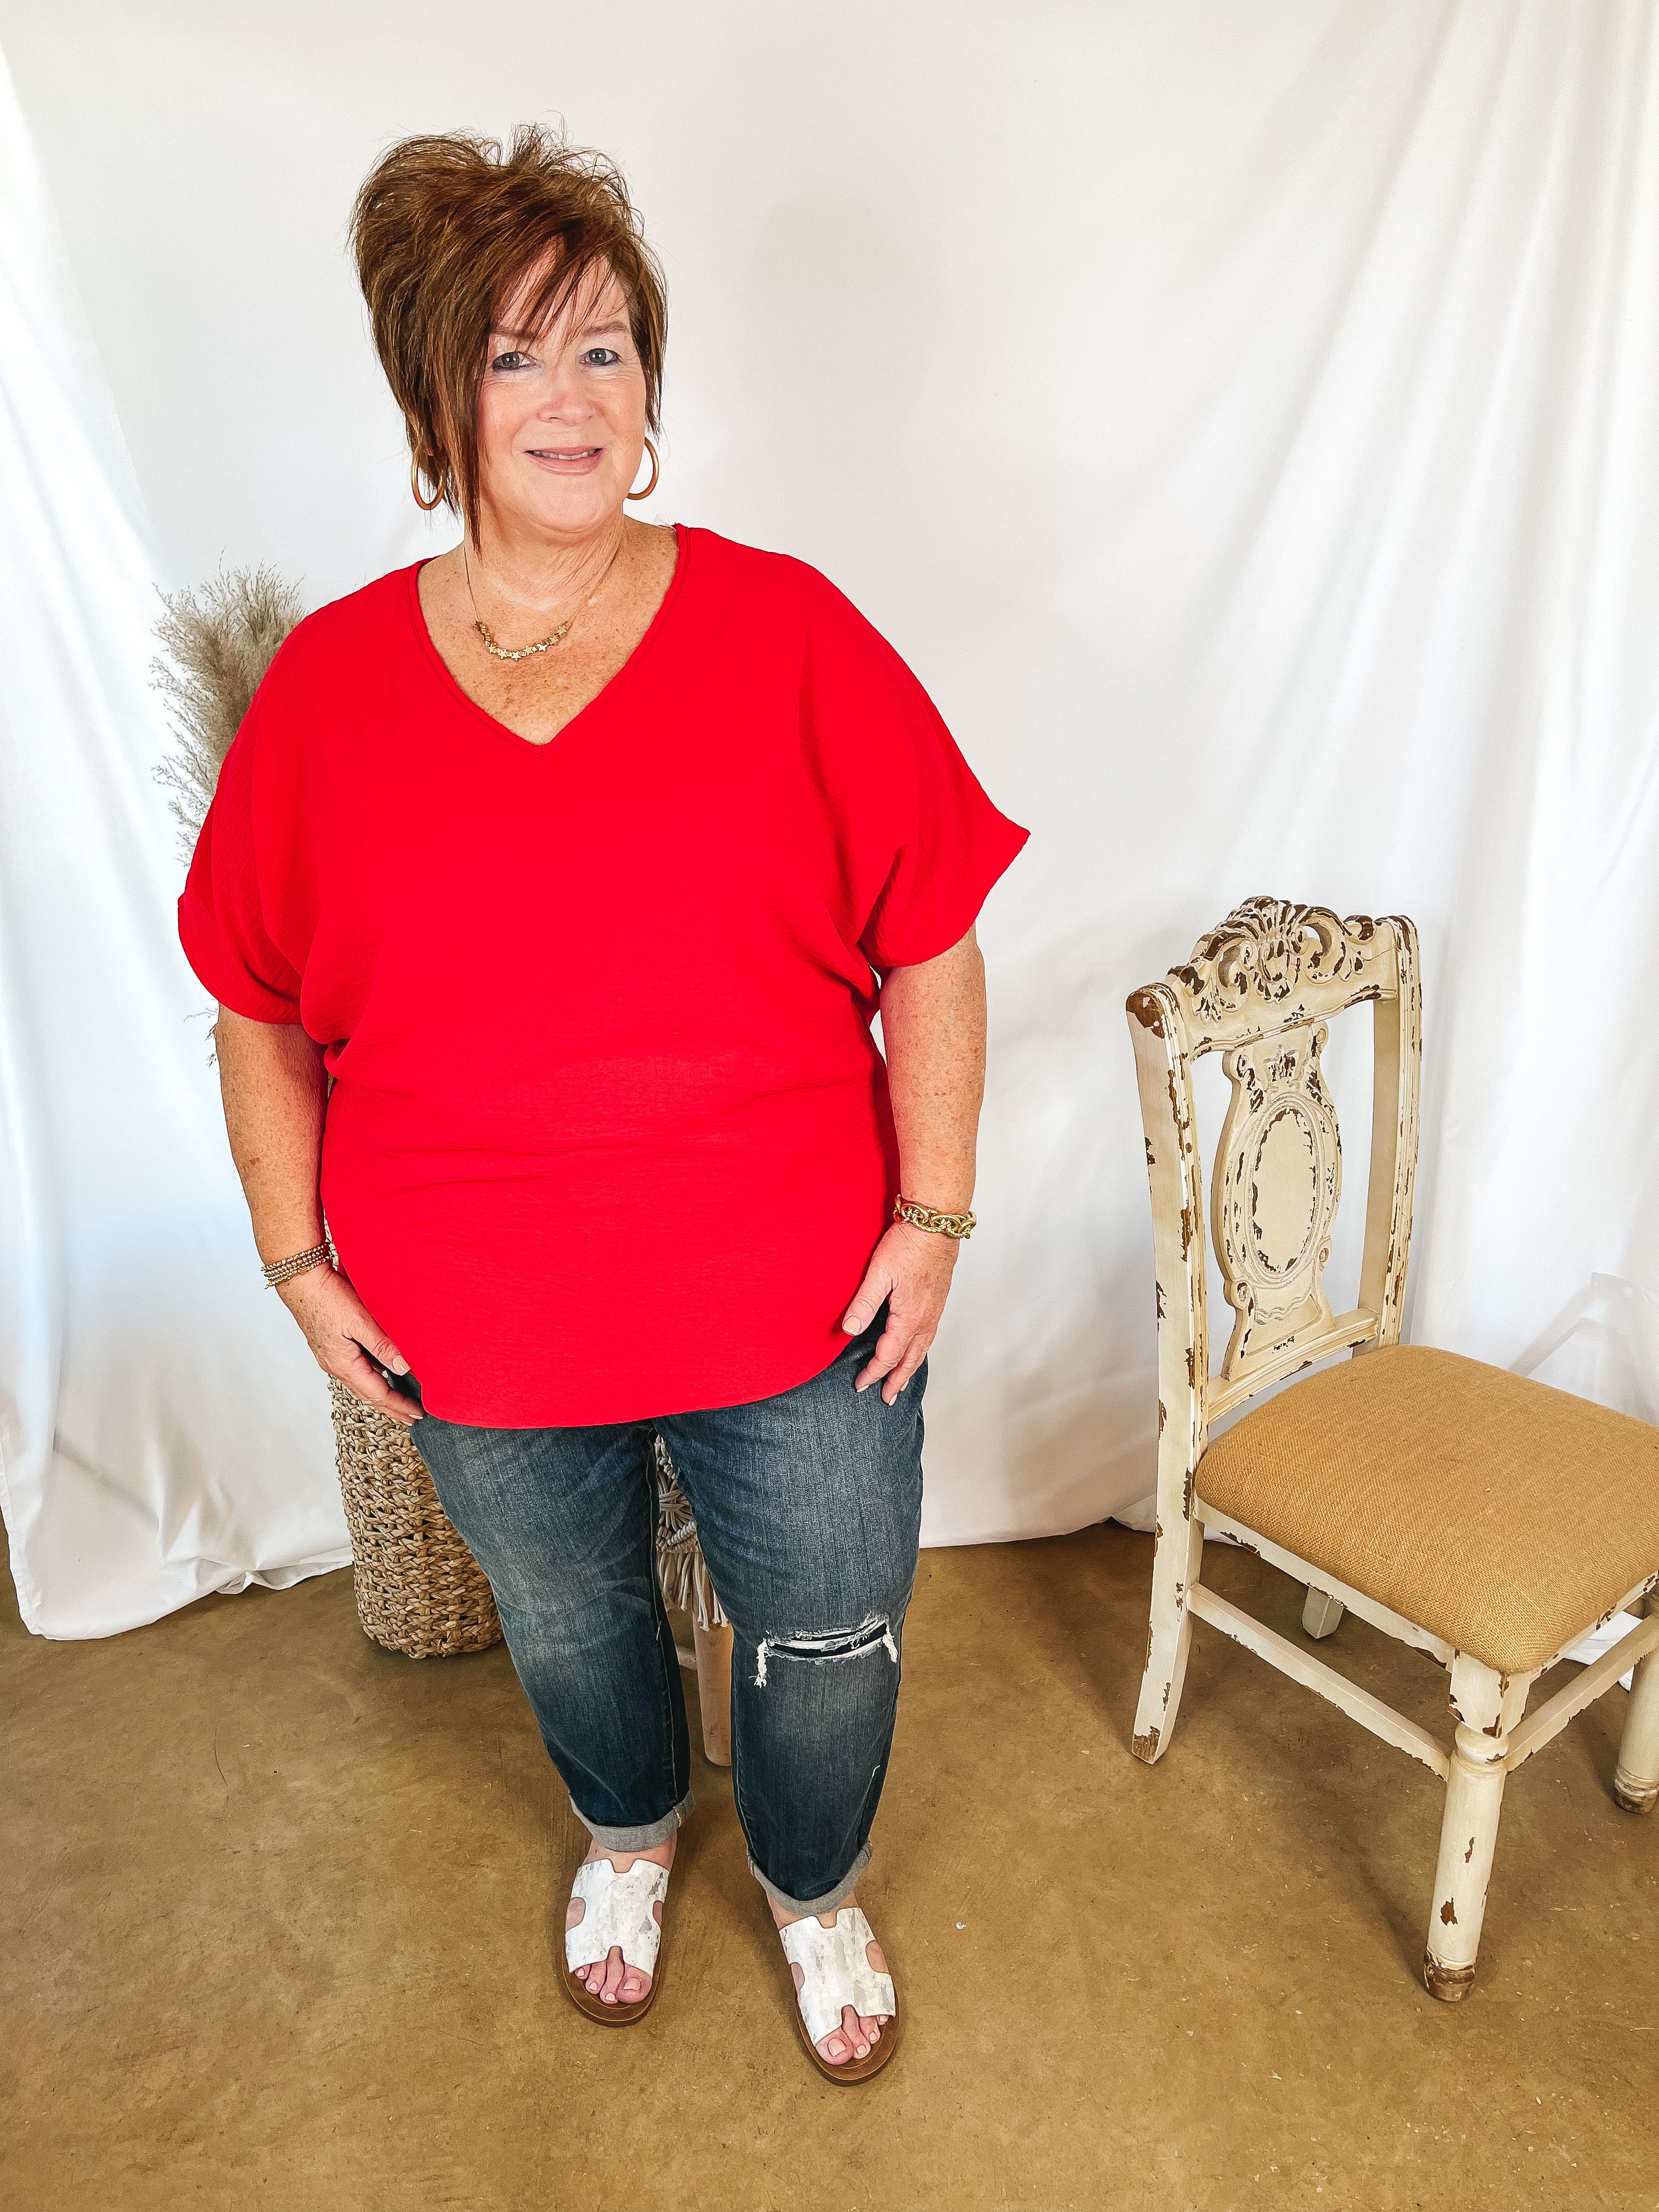 Lovely Dear V Neck Short Sleeve Solid Top in Red - Giddy Up Glamour Boutique